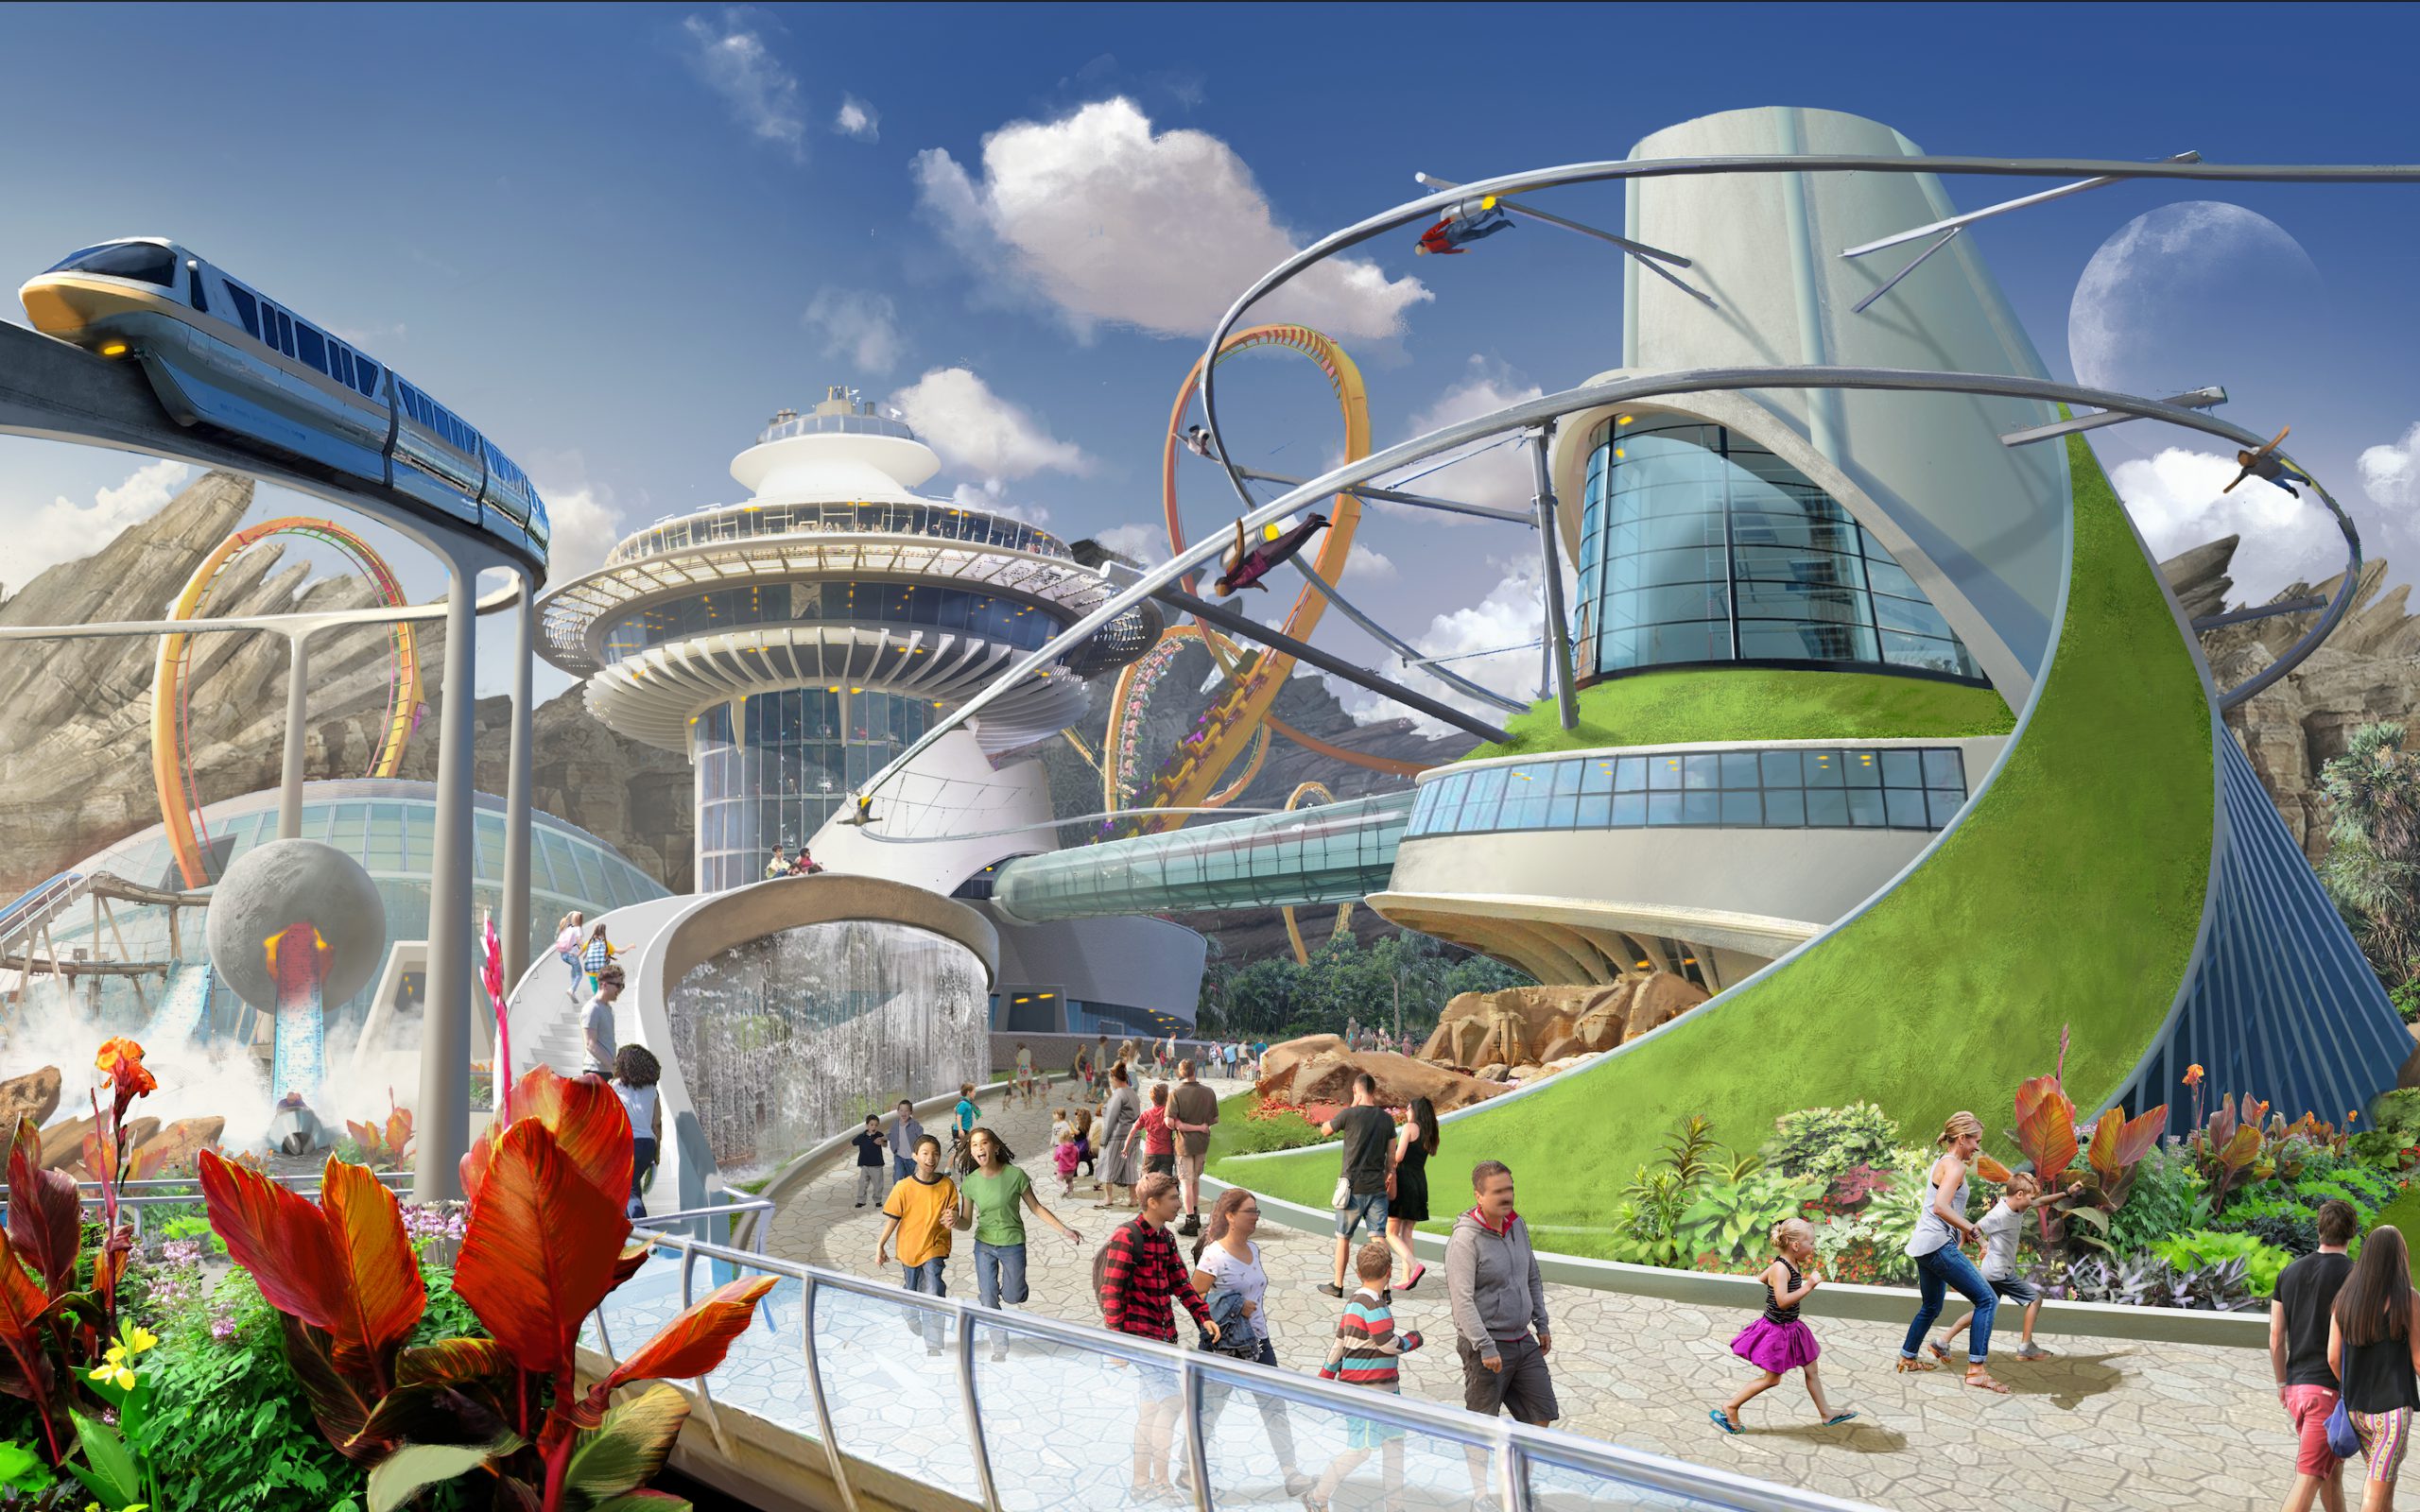 A concept image of a futuristic based theme park with people walking around